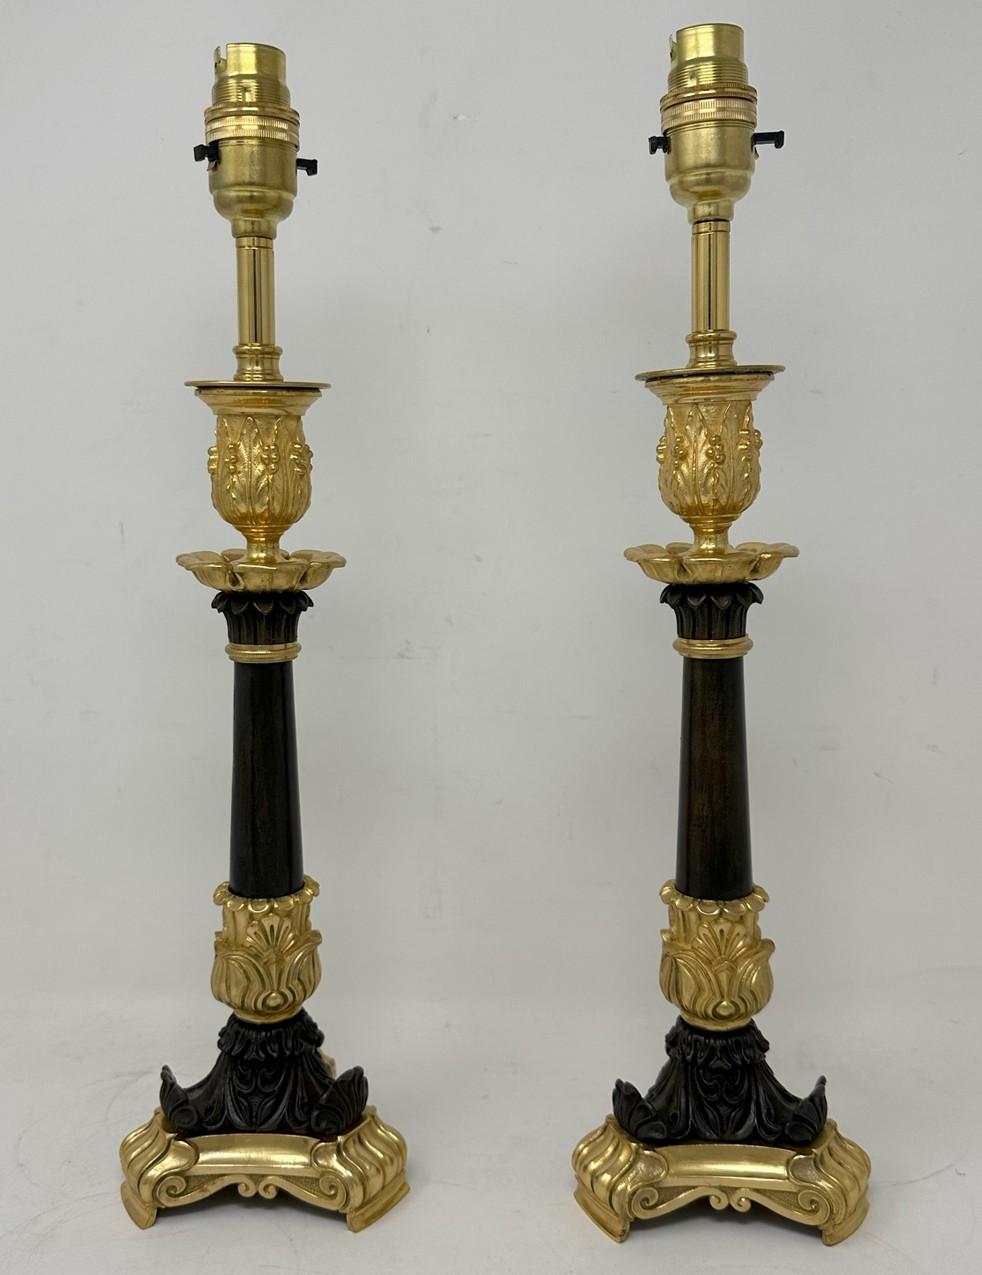 An Exceptionally Fine Pair French Ormolu and patinated Bronze early Victorian Single Light Candlesticks of tall slender form and fairly standard lamp proportions, now converted to a Stunning Pair of Electric Table Lamps, offered in exceptional